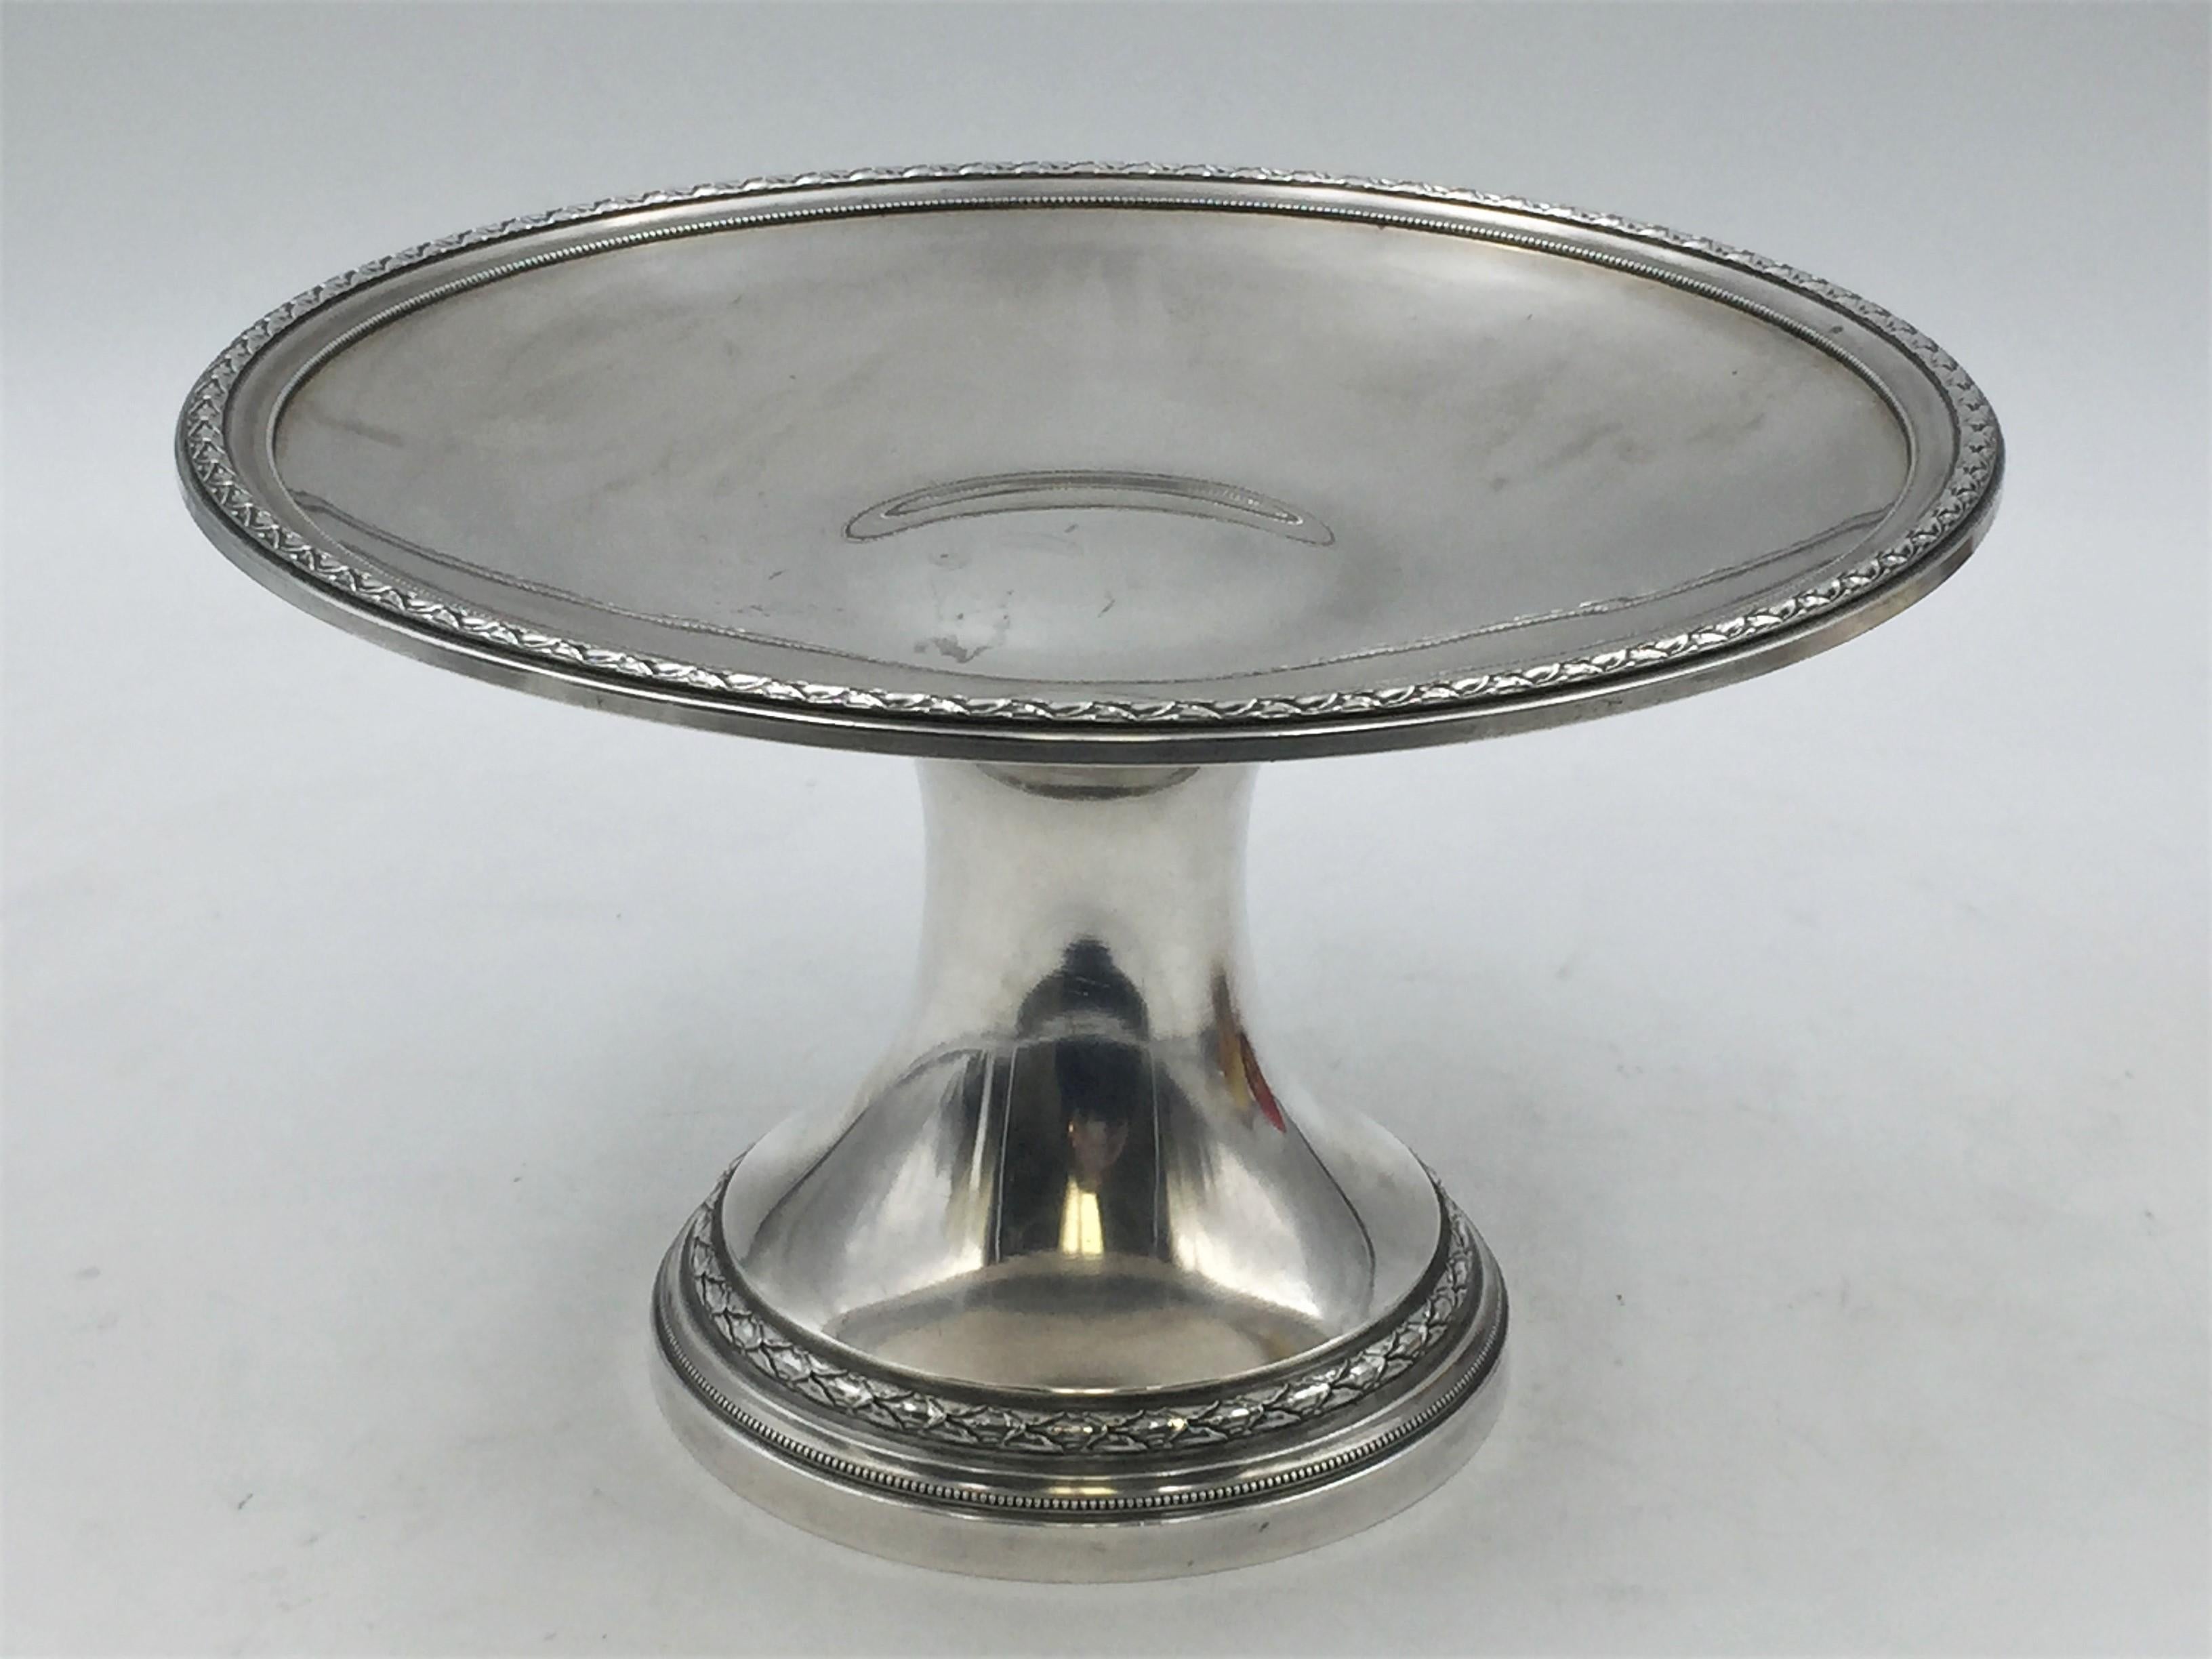 Pair of Puiforcat 19th Century French Sterling Silver Centerpiece Stands Dishes 2